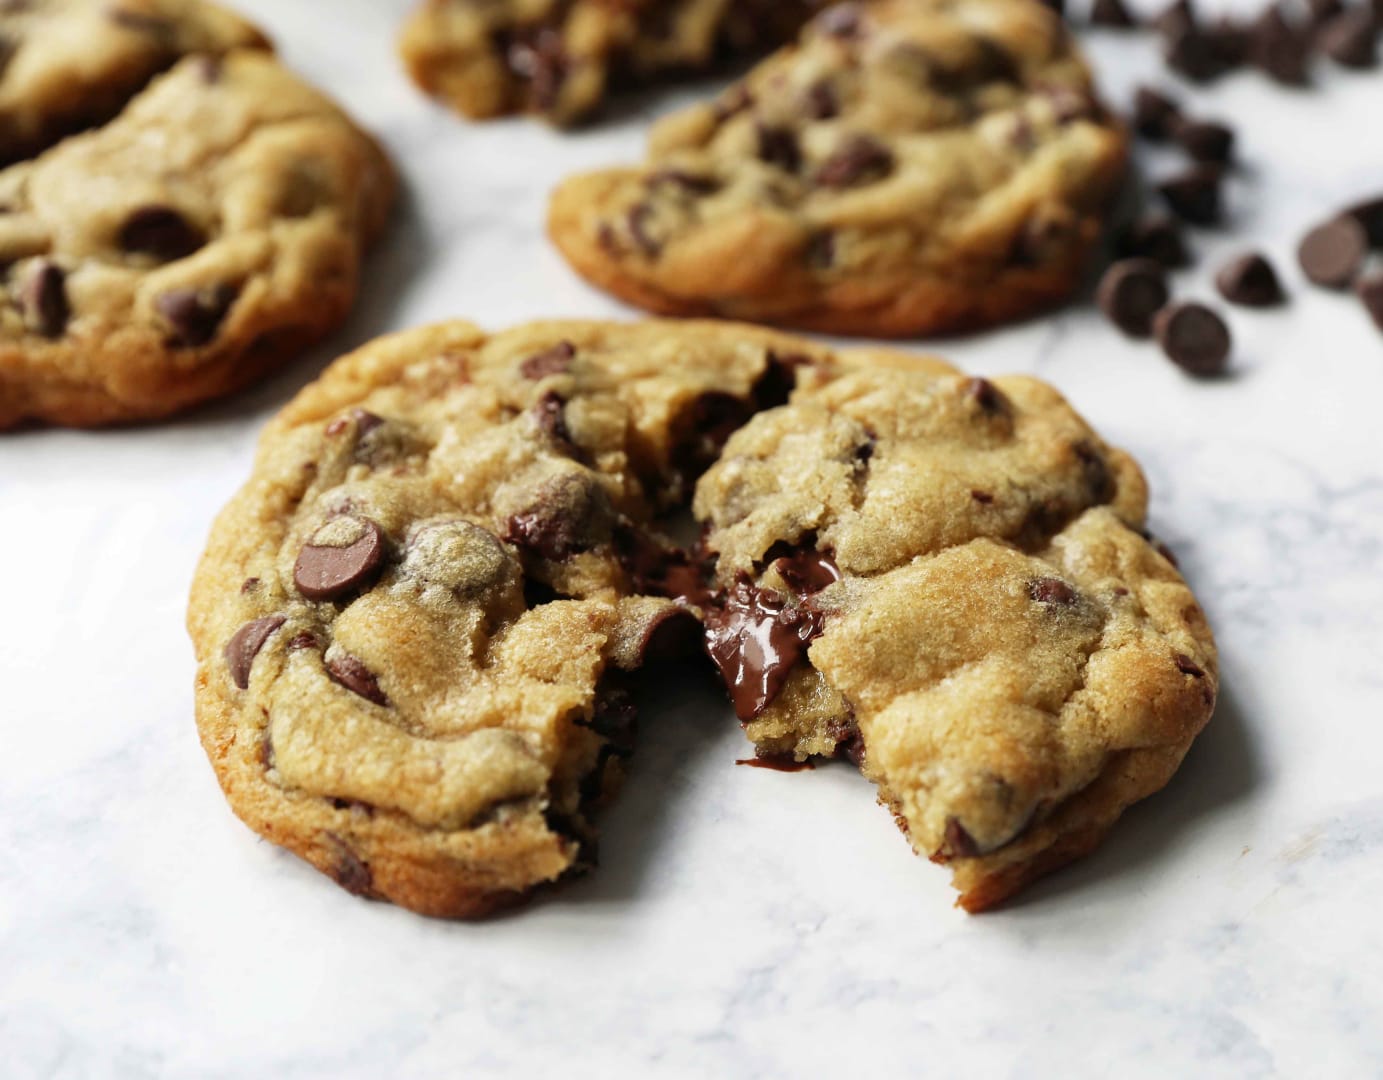 Ultimate Chocolate Chip Cookies Recipe 